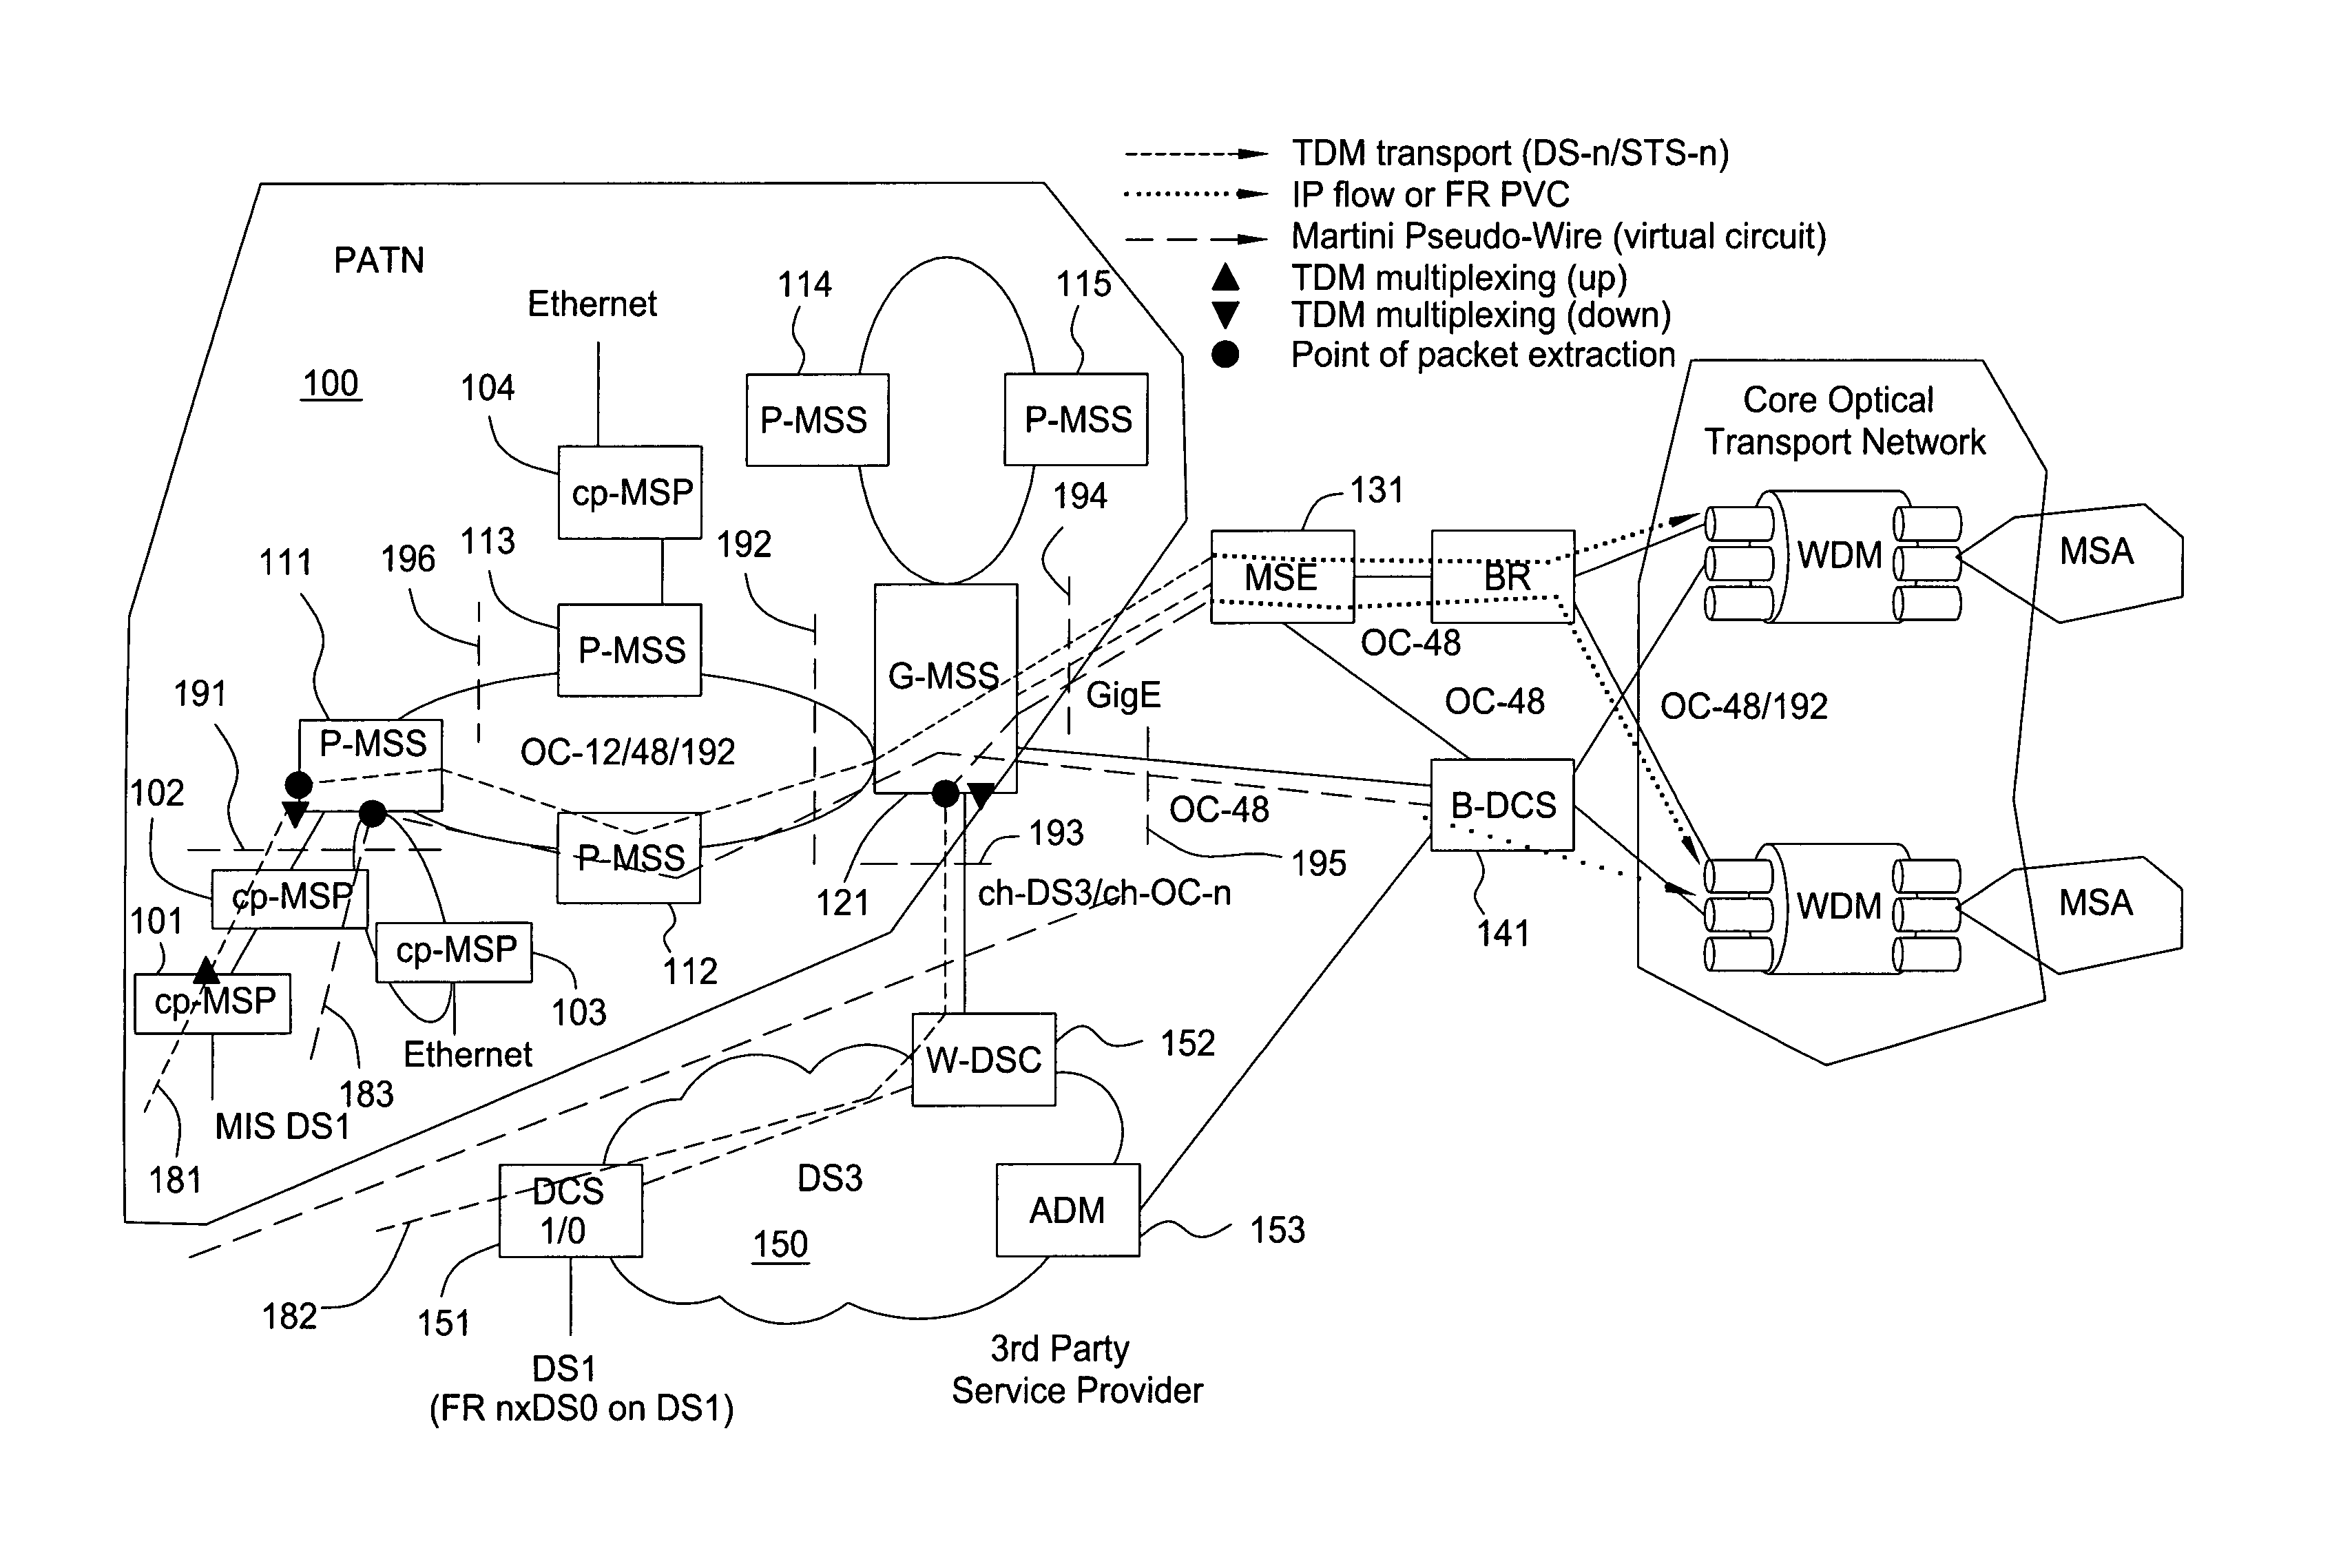 Network architecture for a packet aware transport network